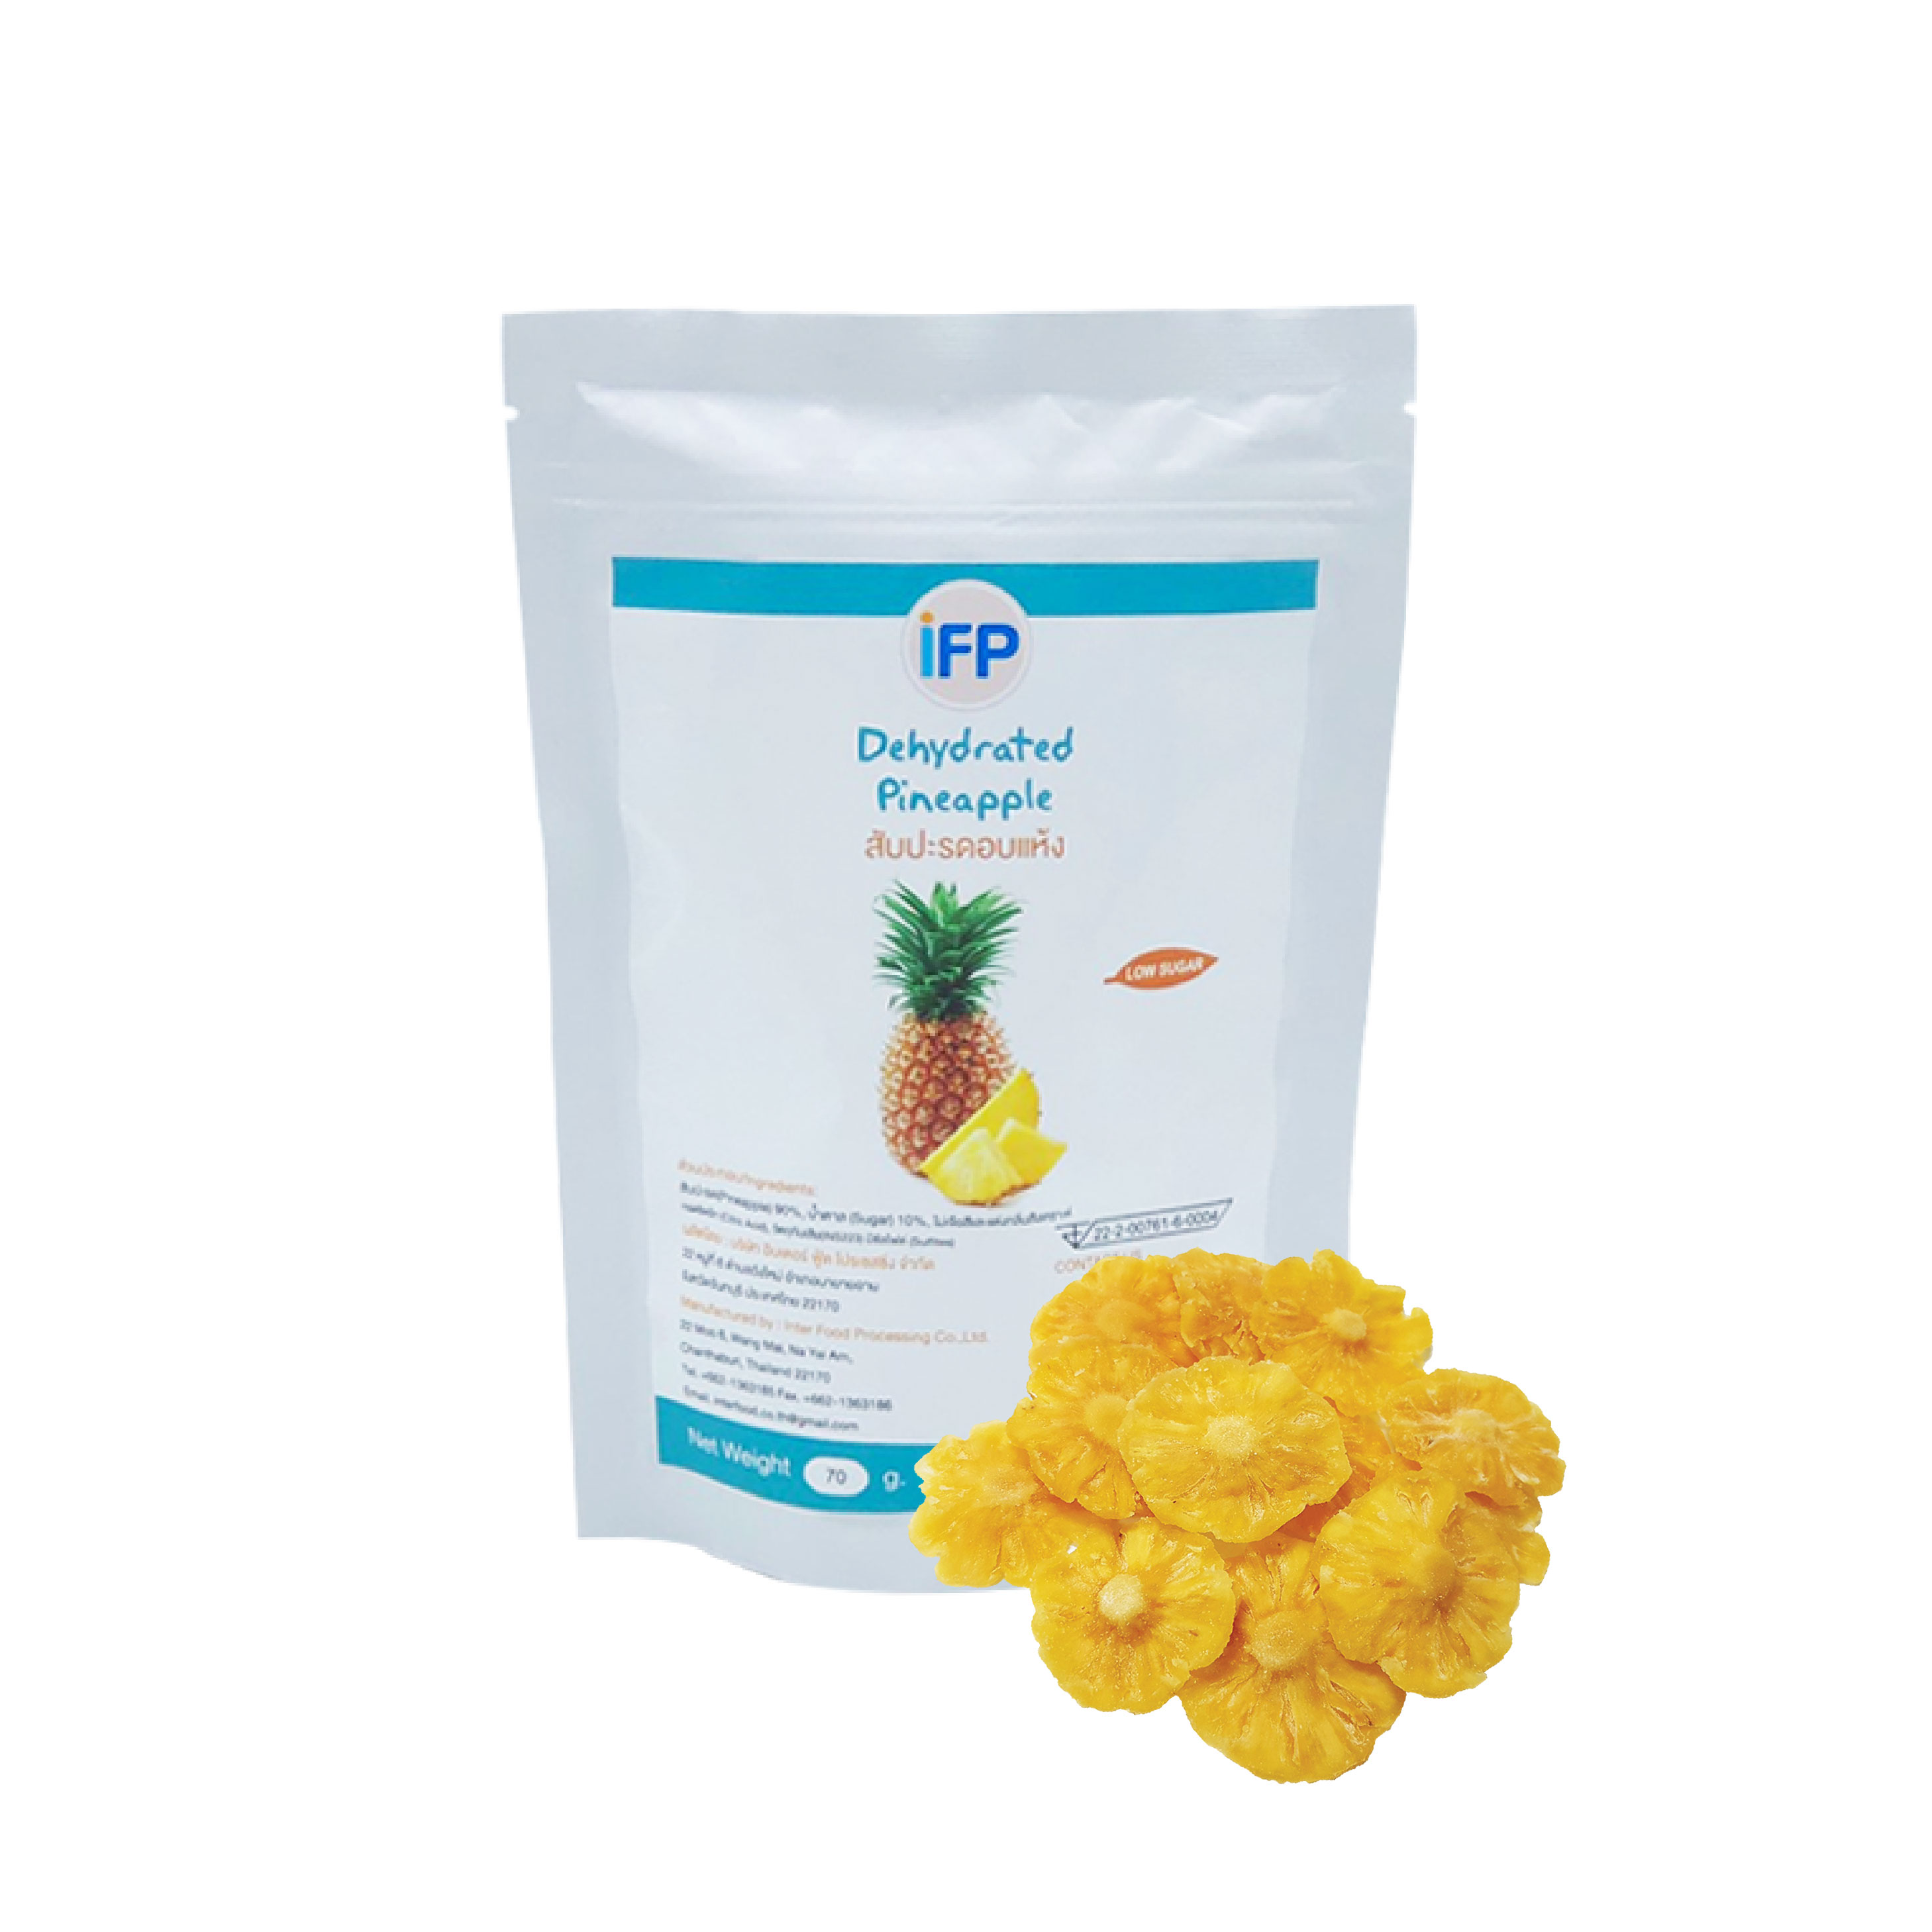 Dehydrated Pineapple - Low Sugar